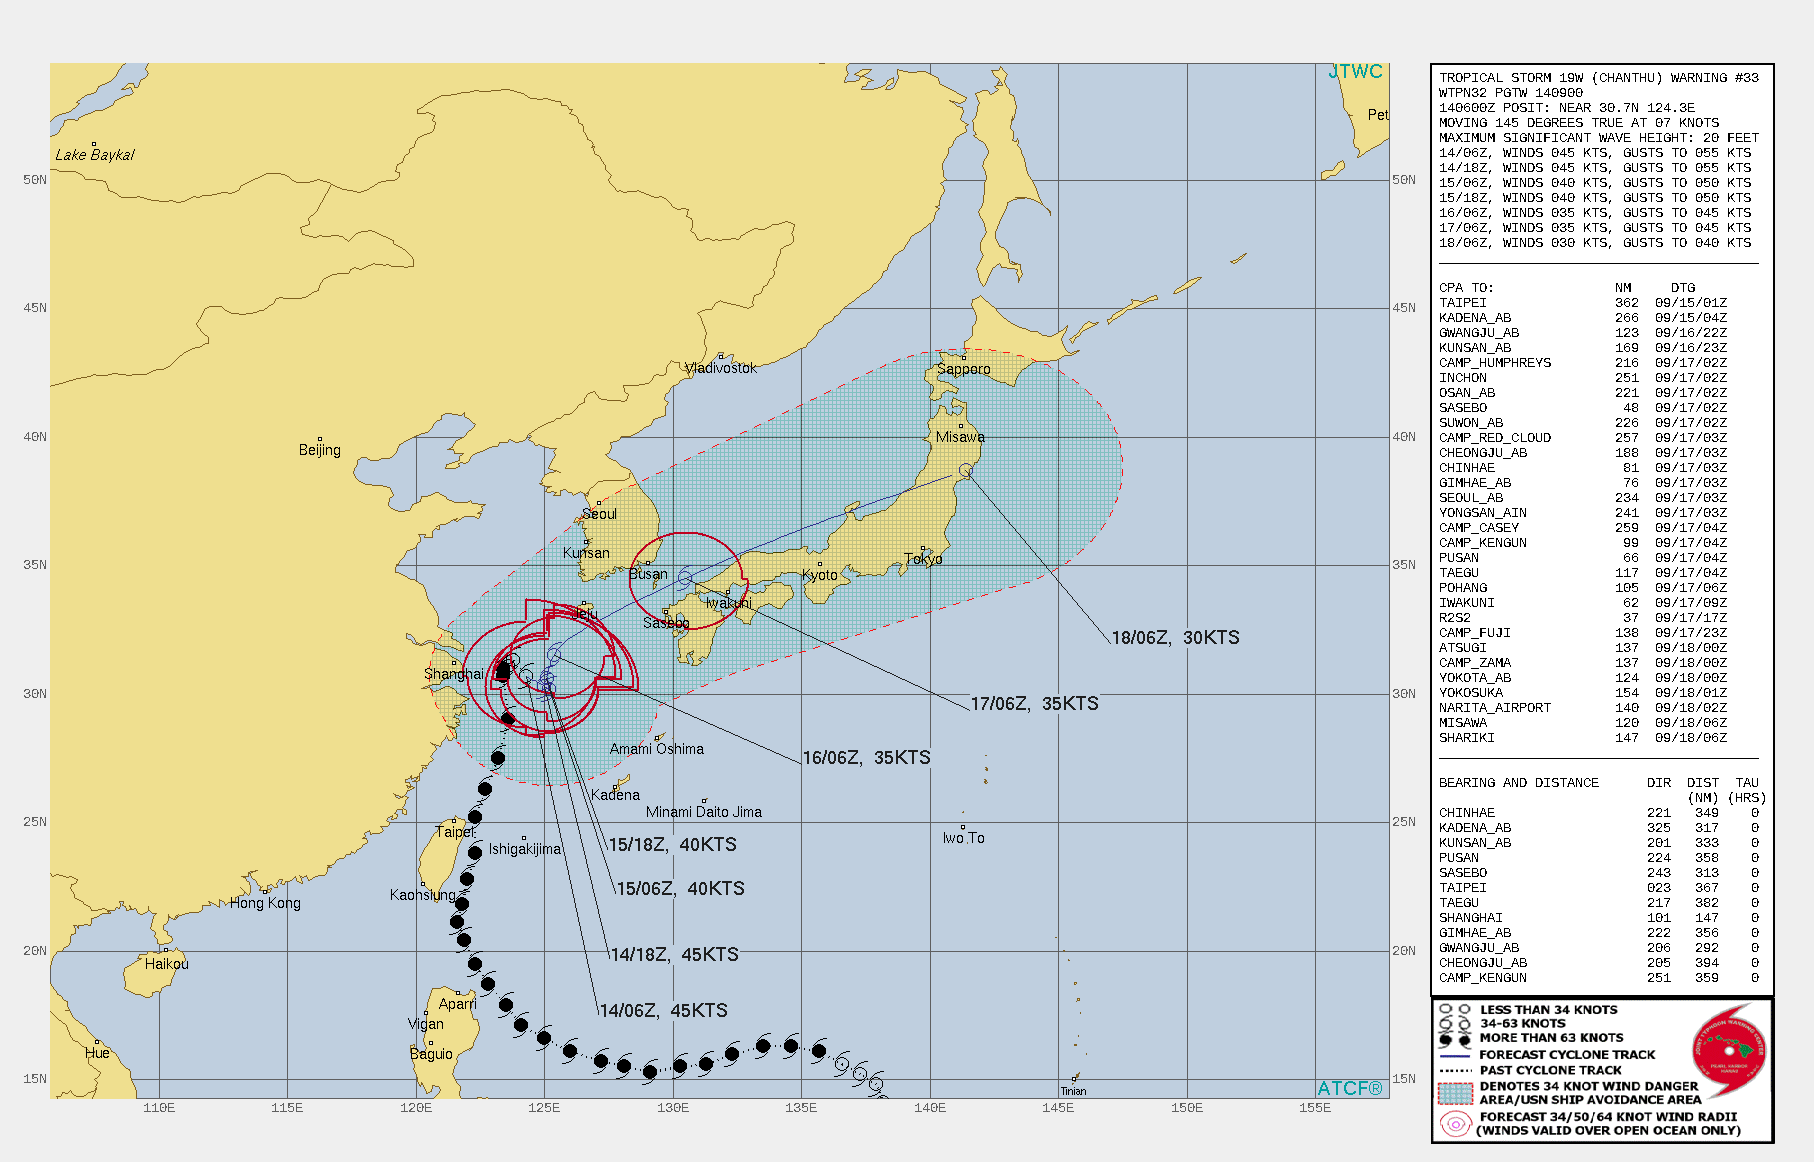 TS 19W(CHANTHU). WARNING 33 ISSUED AT 14/09UTC.SIGNIFICANT FORECAST CHANGES: THERE ARE NO SIGNIFICANT CHANGES TO THE FORECAST FROM THE PREVIOUS WARNING.  FORECAST DISCUSSION: TS CHANTU IS EXPECTED TO REMAIN QUASI-STATIONARY (QS) OVER THE NEXT TWO DAYS IN THE COL. AFTERWARD, THE STR TO THE NORTHWEST WILL WEAKEN, ALLOWING THE SECONDARY SUBTROPICAL RIDGE TO THE SOUTHEAST TO ASSUME STEERING AND DRIVE THE SYSTEM NORTHEASTWARD THROUGH THE SEA OF JAPAN (SOJ), CROSSING NORTHERN HONSHU NEAR MISAWA AND EXITING INTO THE PACIFIC OCEAN SHORTLY AFTER 96H. THE MARGINALLY UNFAVORABLE CONDITIONS, EXACERBATED BY FURTHER COOLING OF THE SSTS AS THE QS SYSTEM GENERATES UPWELLING OF DEEP COLD WATER, WILL PROMOTE STEADY WEAKENING DOWN TO 35 KNOTS BY 48H. AFTERWARD, THE NORTHEASTWARD TRACK INTO HIGHER VERTICAL WIND SHEAR AND COLDER SSTS OF THE SOJ WILL FURTHER WEAKEN IT TO 30KNOTS BY 96H AS IT BECOMES FULLY EXTRATROPICAL.